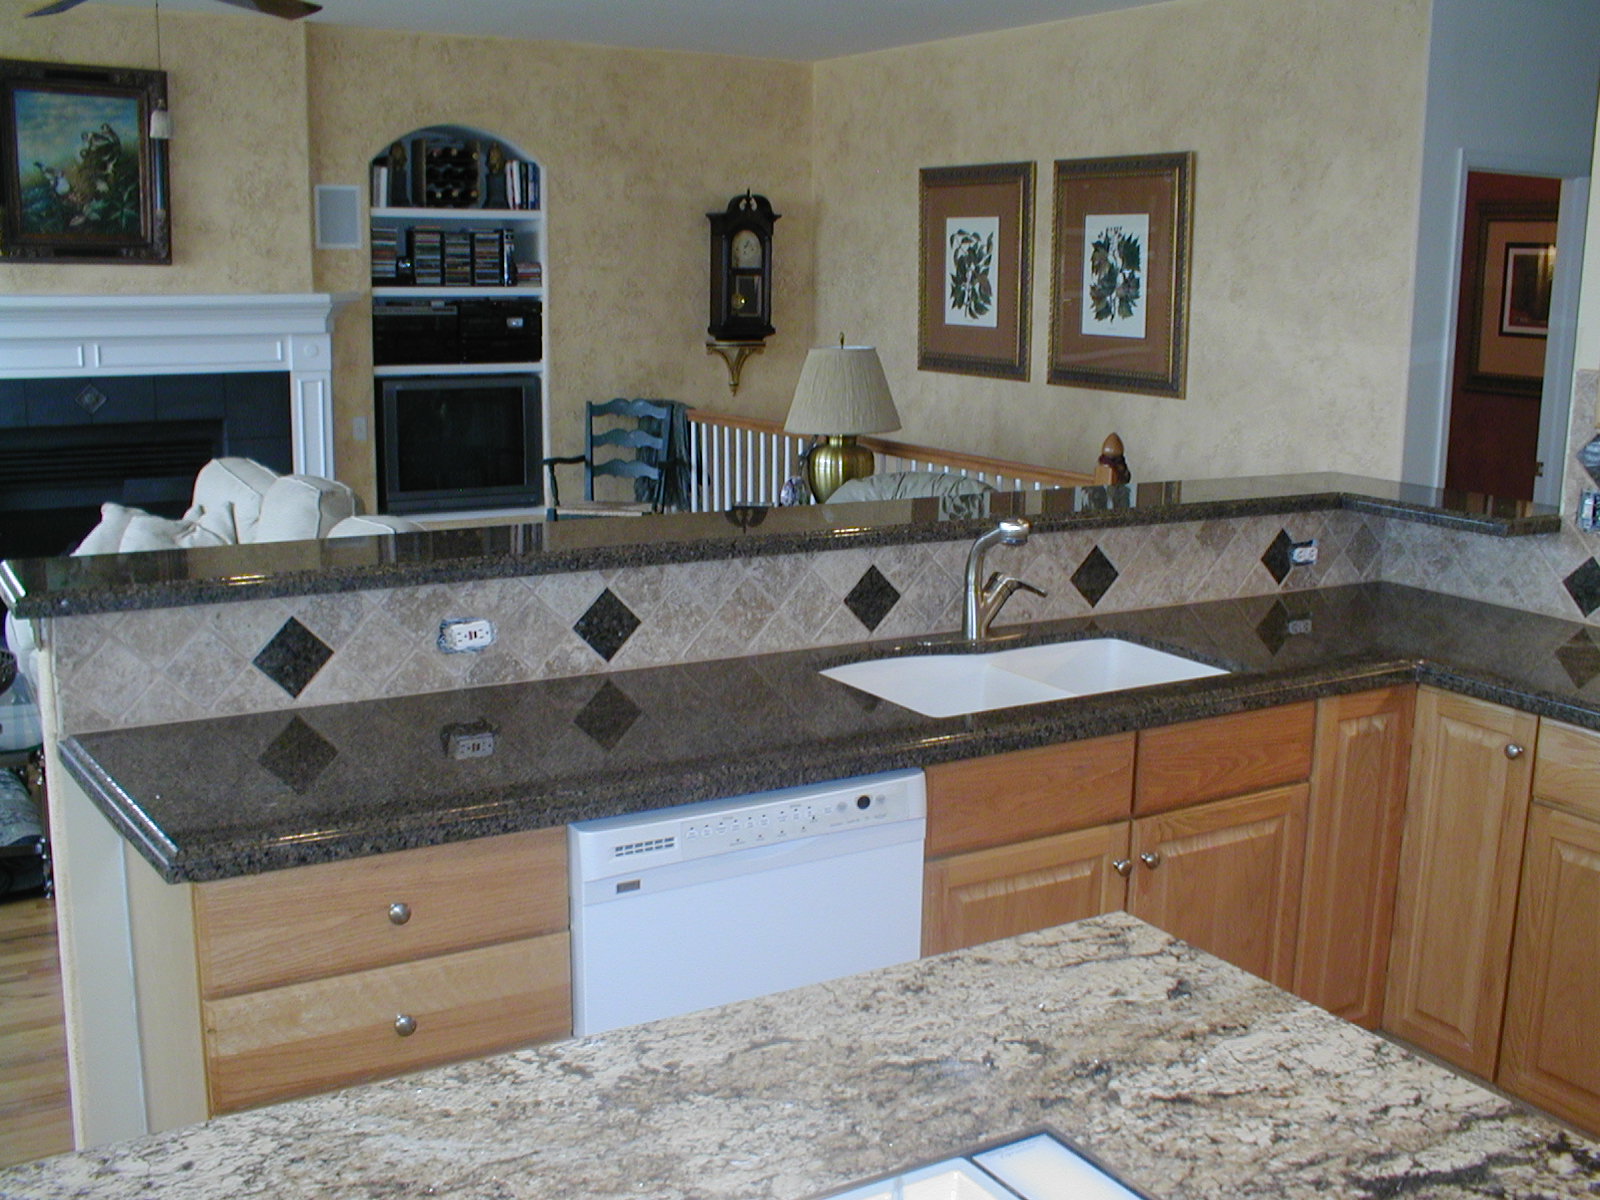 Integrity Installations A division of Front Range Backsplash: 4x4 Tumbled 